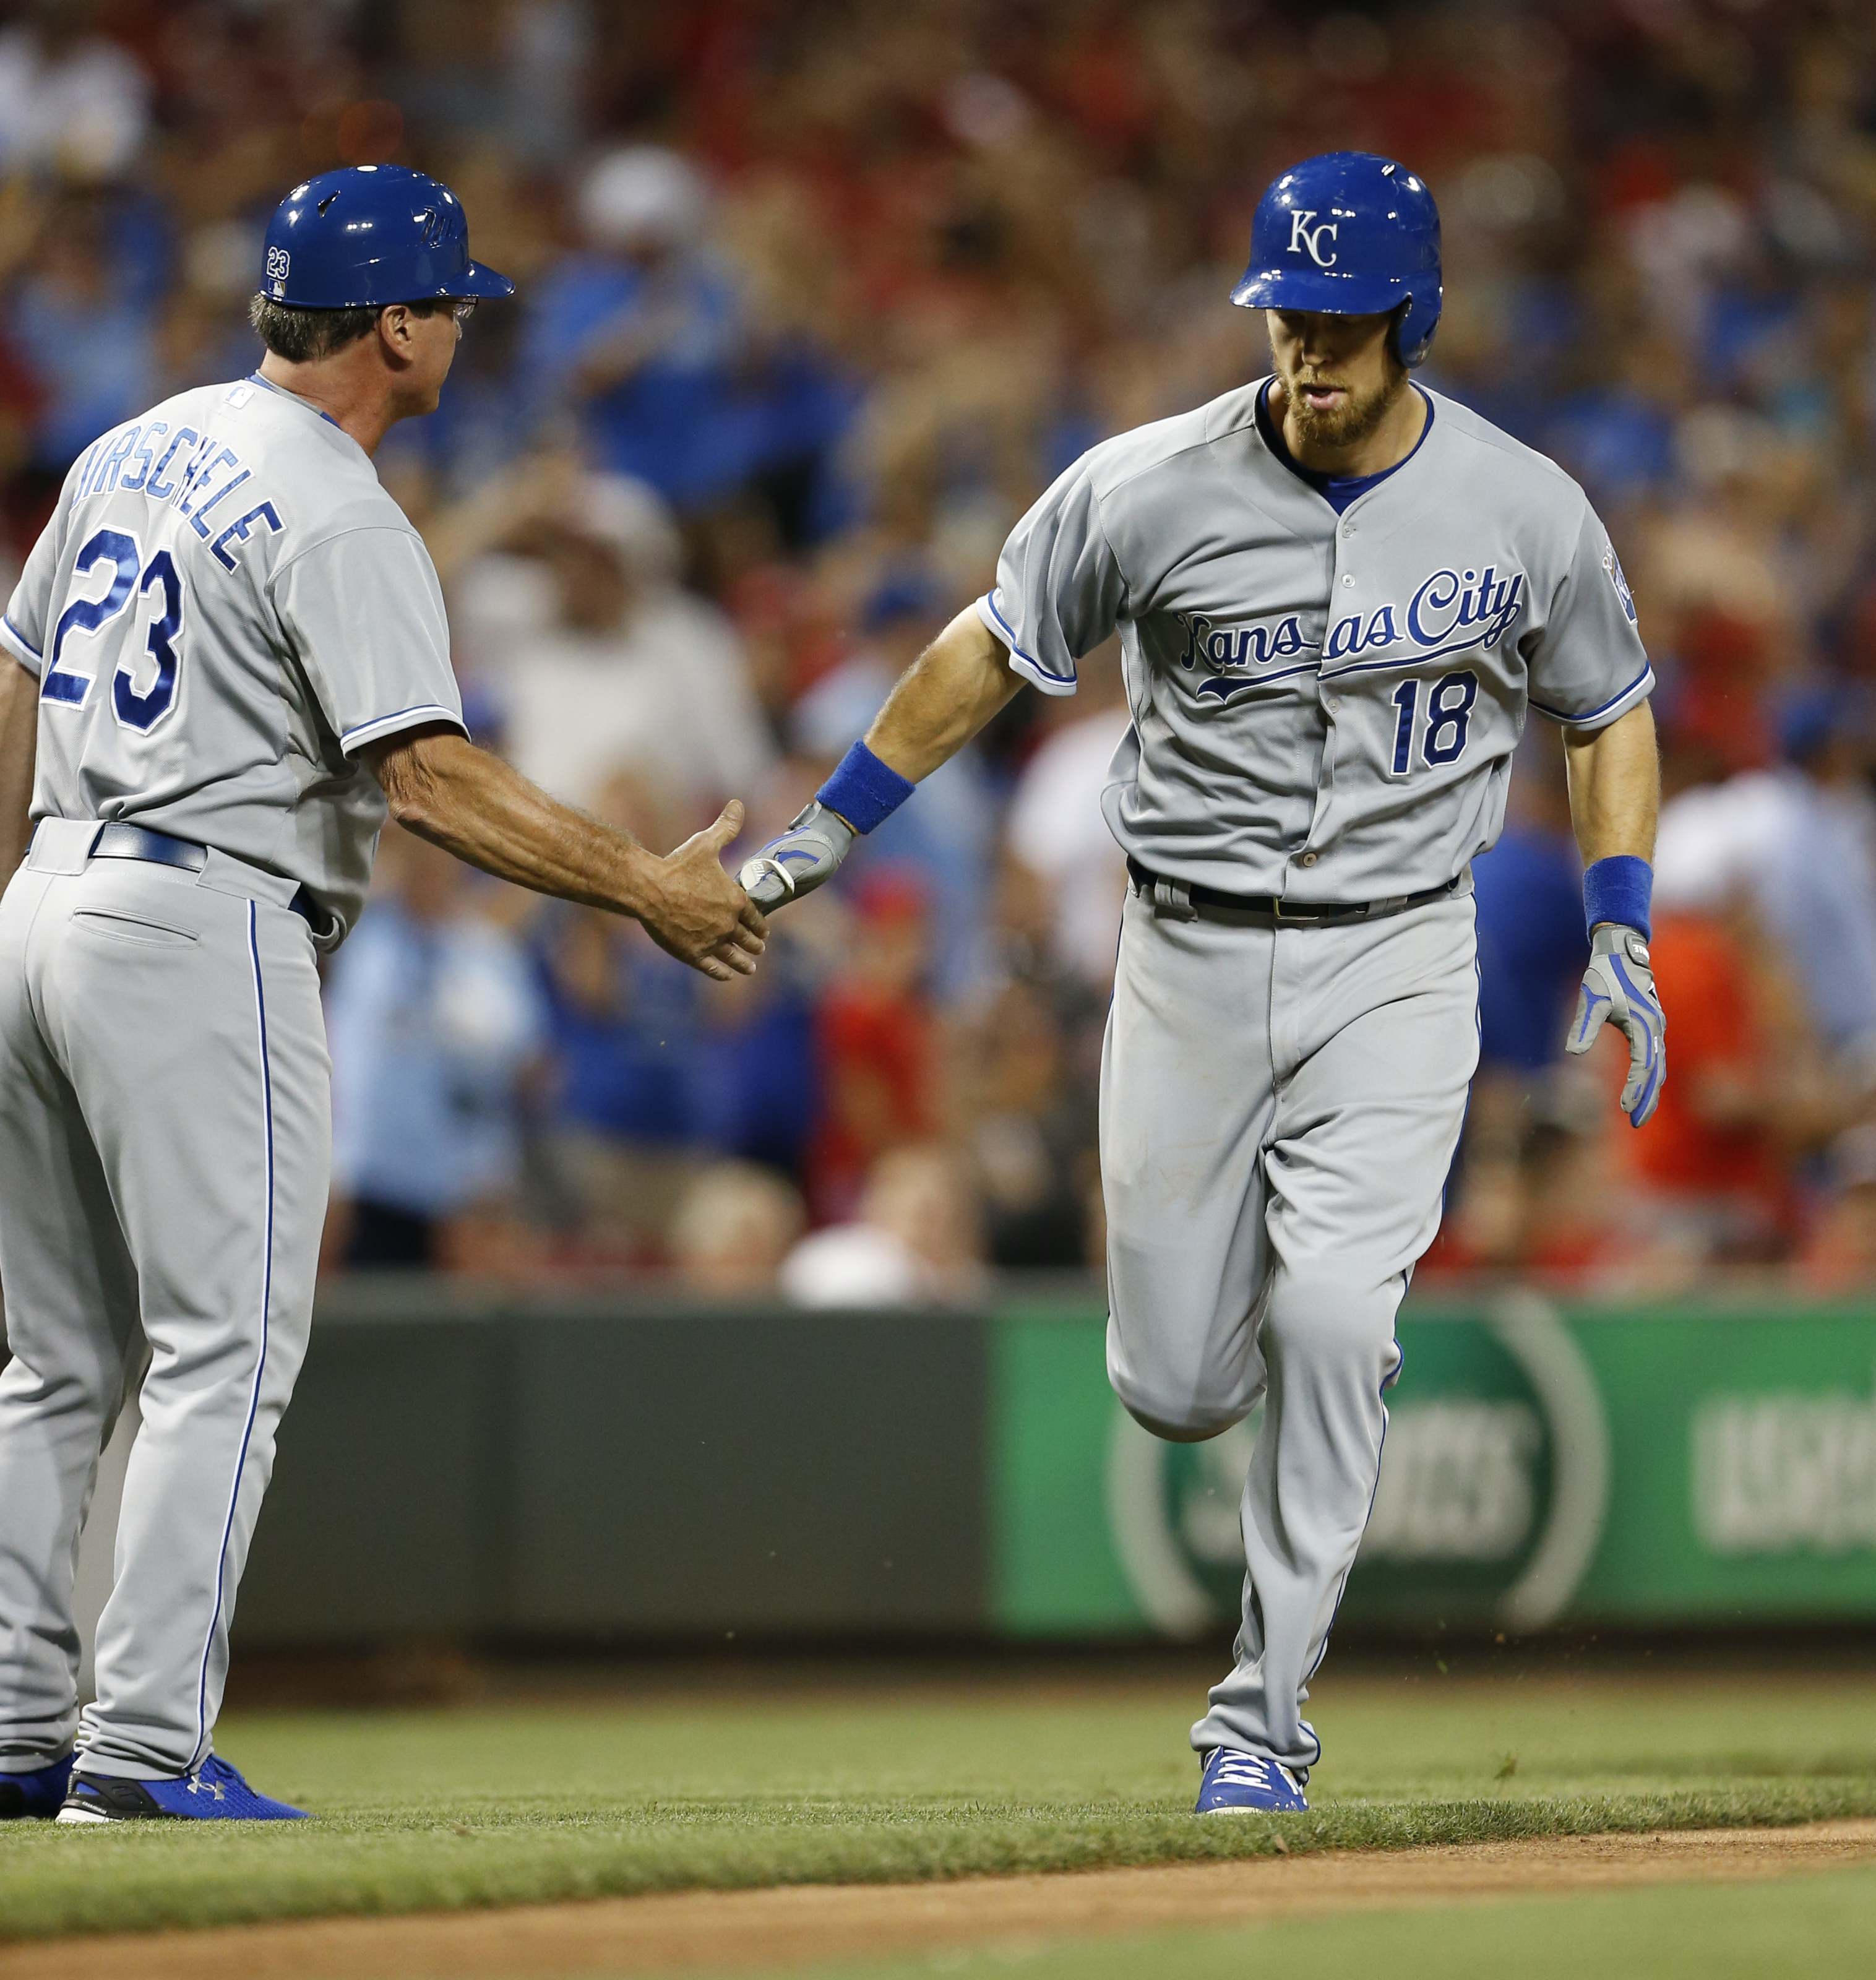 Reds miscues benefit Royals in 13-inning victory – News Radio KMAN